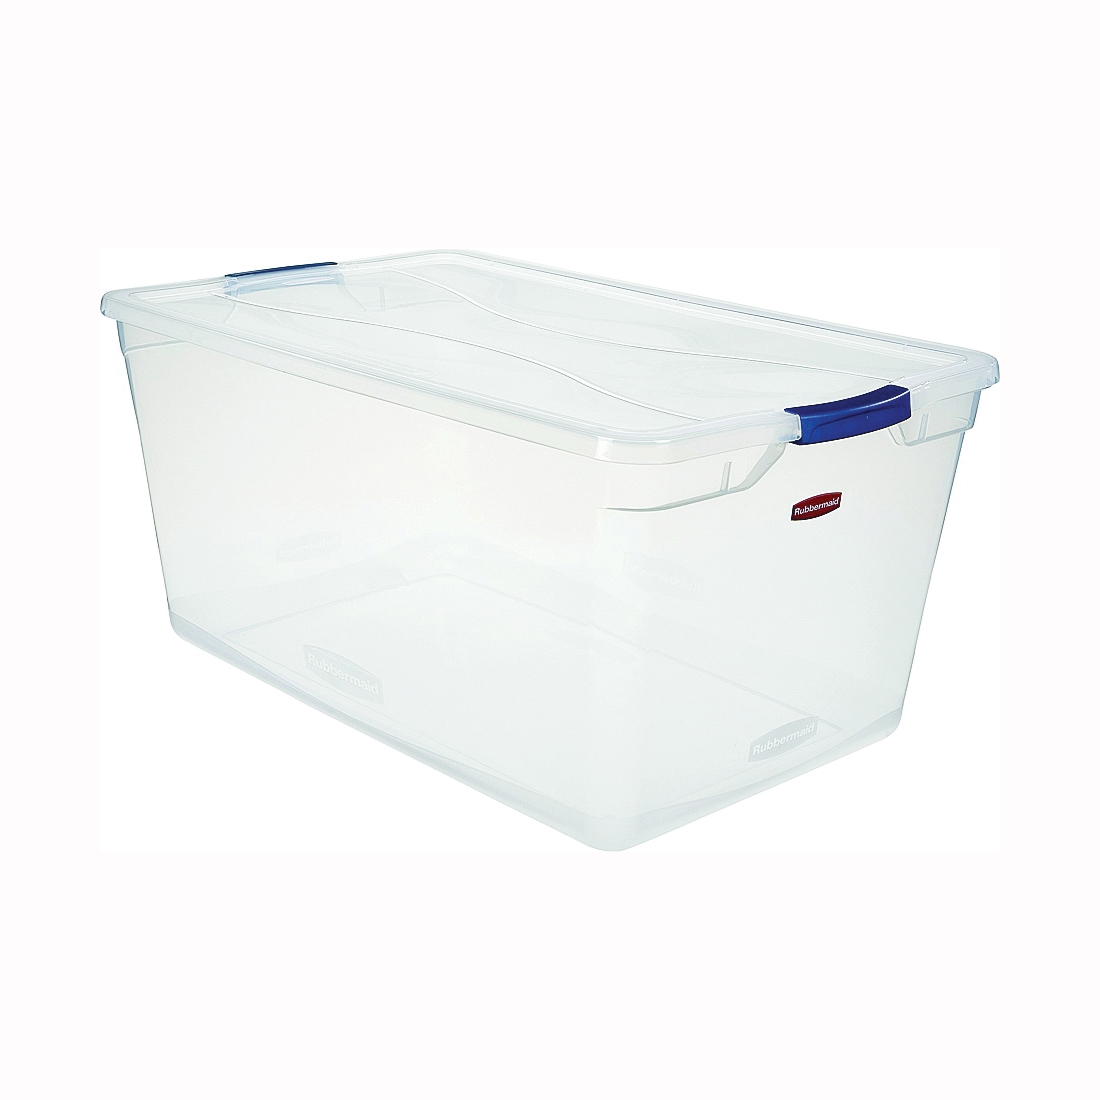 Replacement vent pieces on Rubbermaid square easy find lids : r